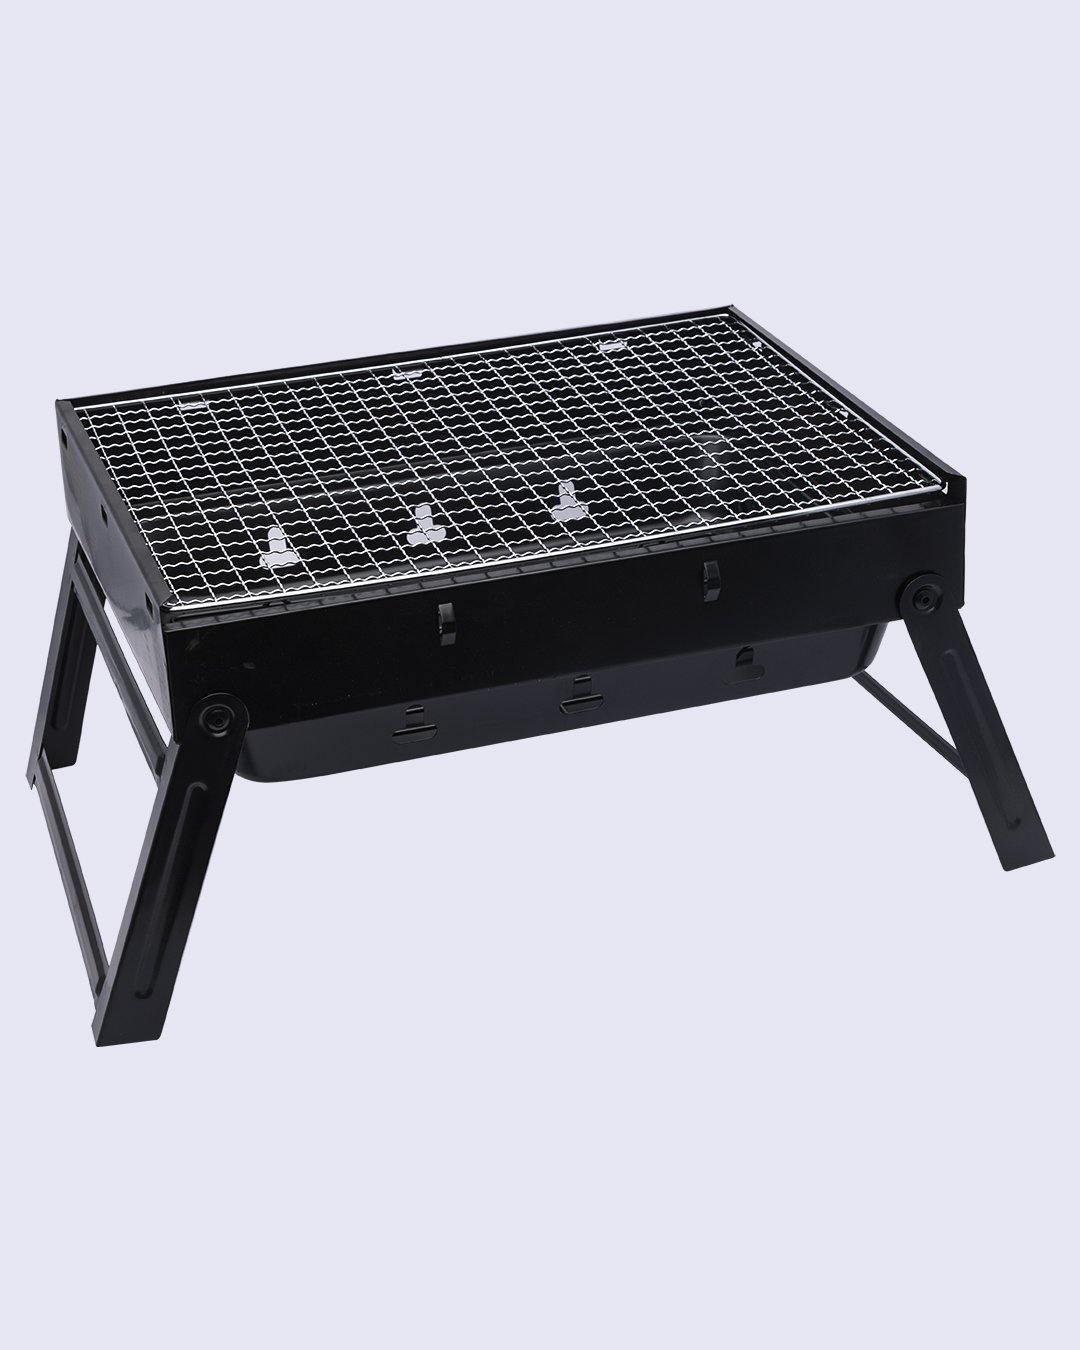 Barbecue Grill, Compact Design, for Cooking, Black, Iron - MARKET 99